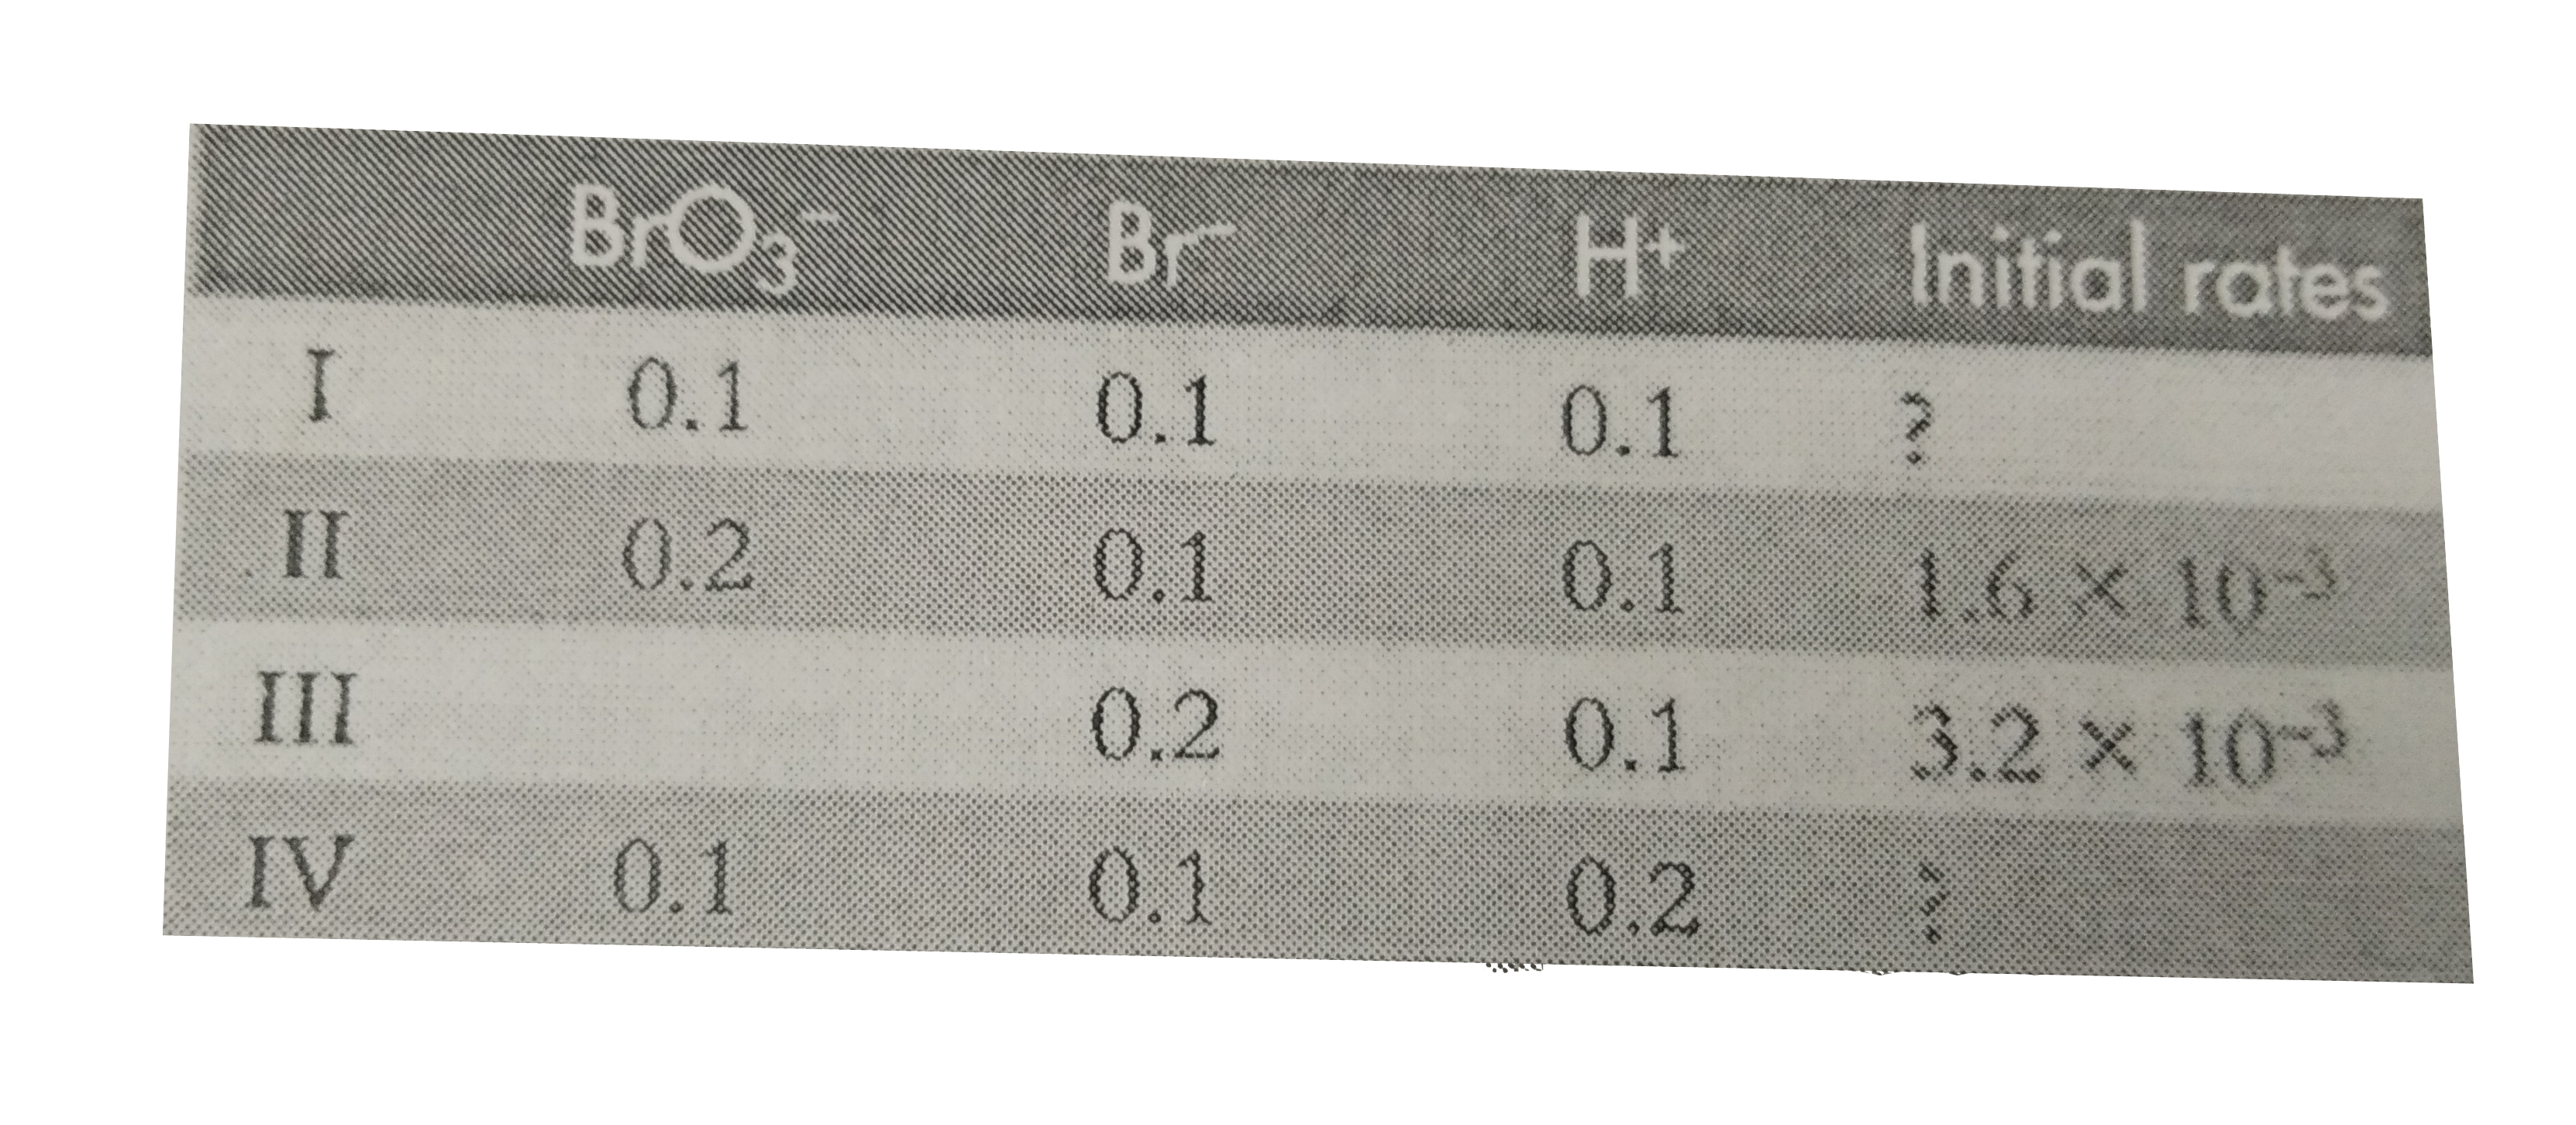 BrO(3)^(-) + 5Br^(-) + 6H^(+) to 3Br(2) + 3H(2)O   The order of reaction with respect to BrO(3)^(-) is 2 and with respect to other reactants is one. Complete the following table.